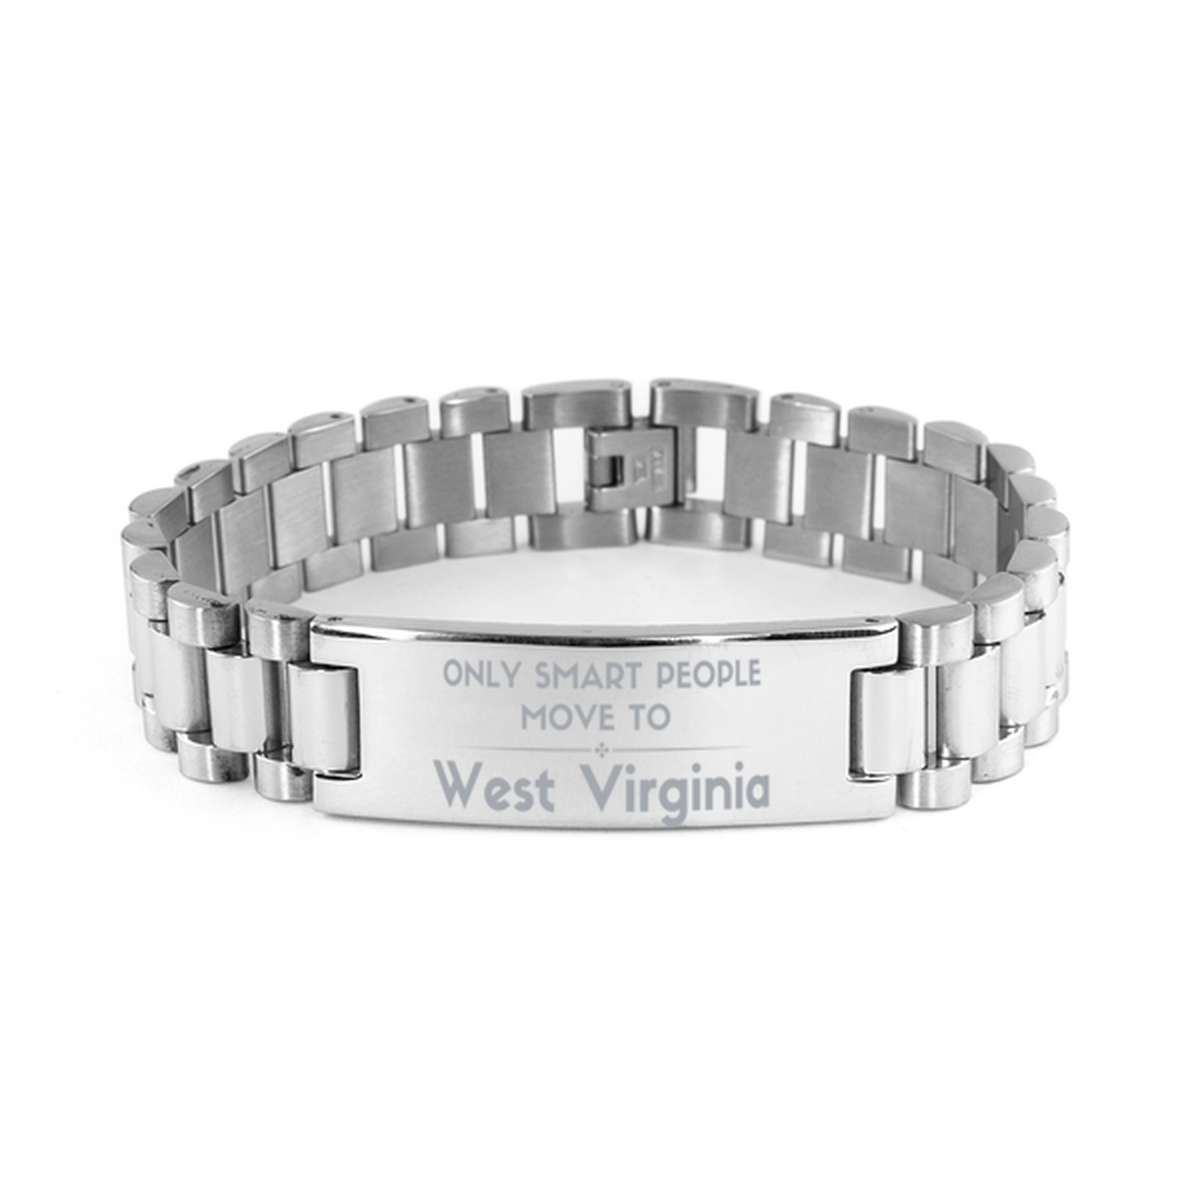 Only smart people move to West Virginia Ladder Stainless Steel Bracelet, Gag Gifts For West Virginia, Move to West Virginia Gifts for Friends Coworker Funny Saying Quote